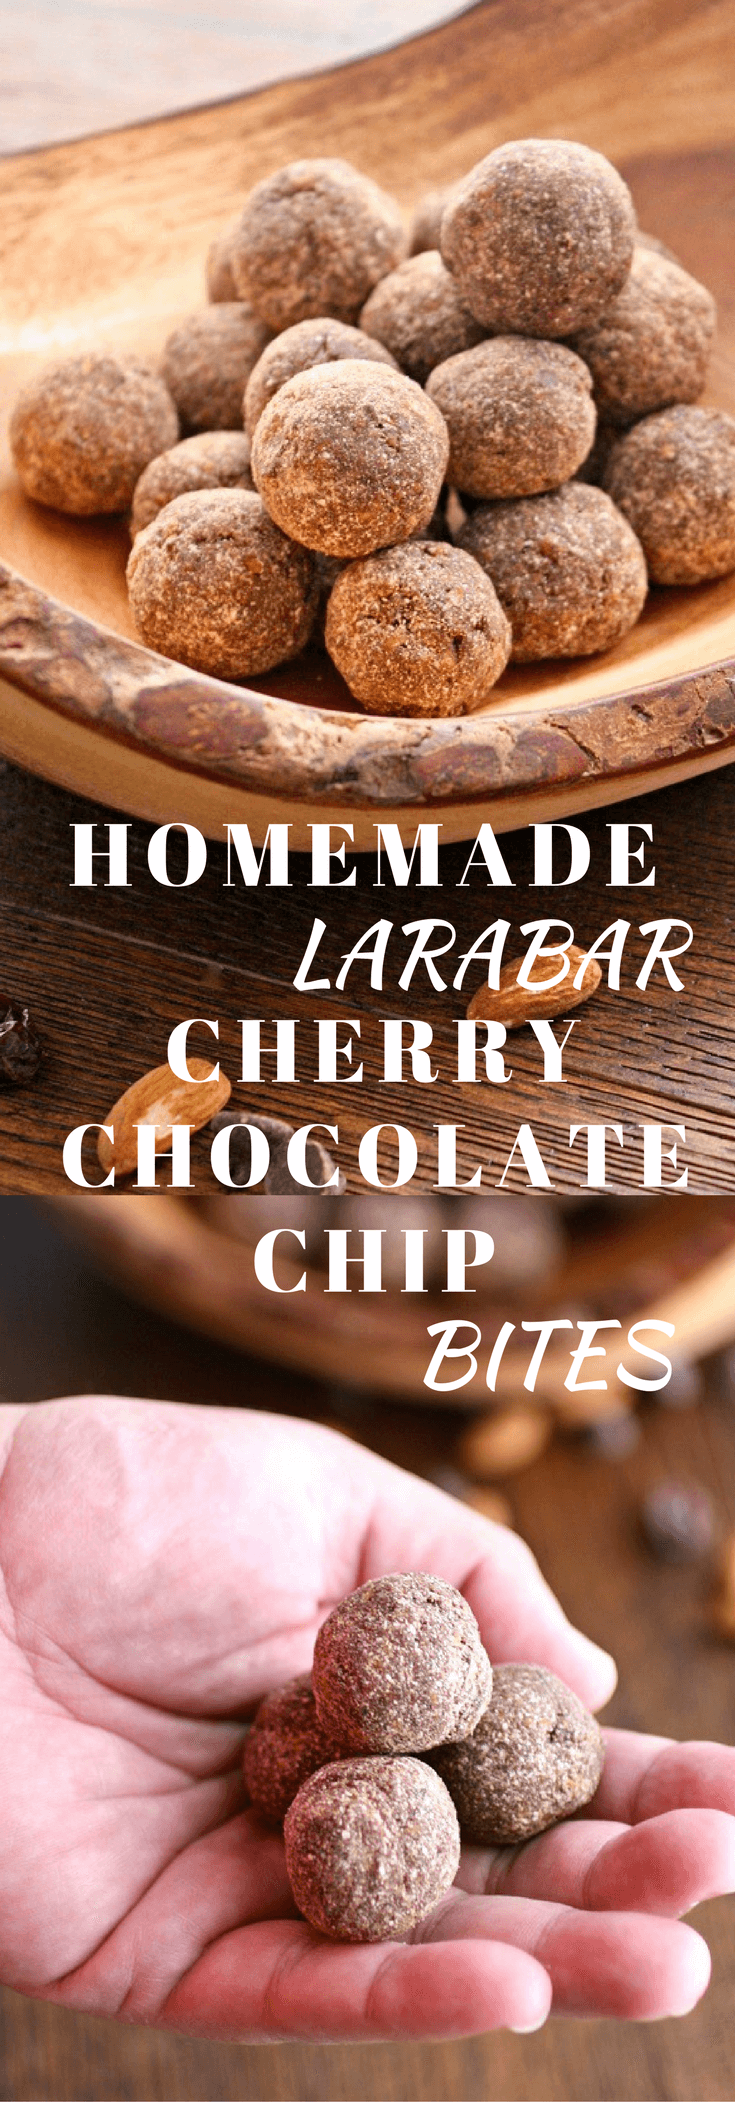 Homemade Larabar Cherry Chocolate Chip Bites are perfet to satisfy any snack attack! They're healthy, and easy to make, too!